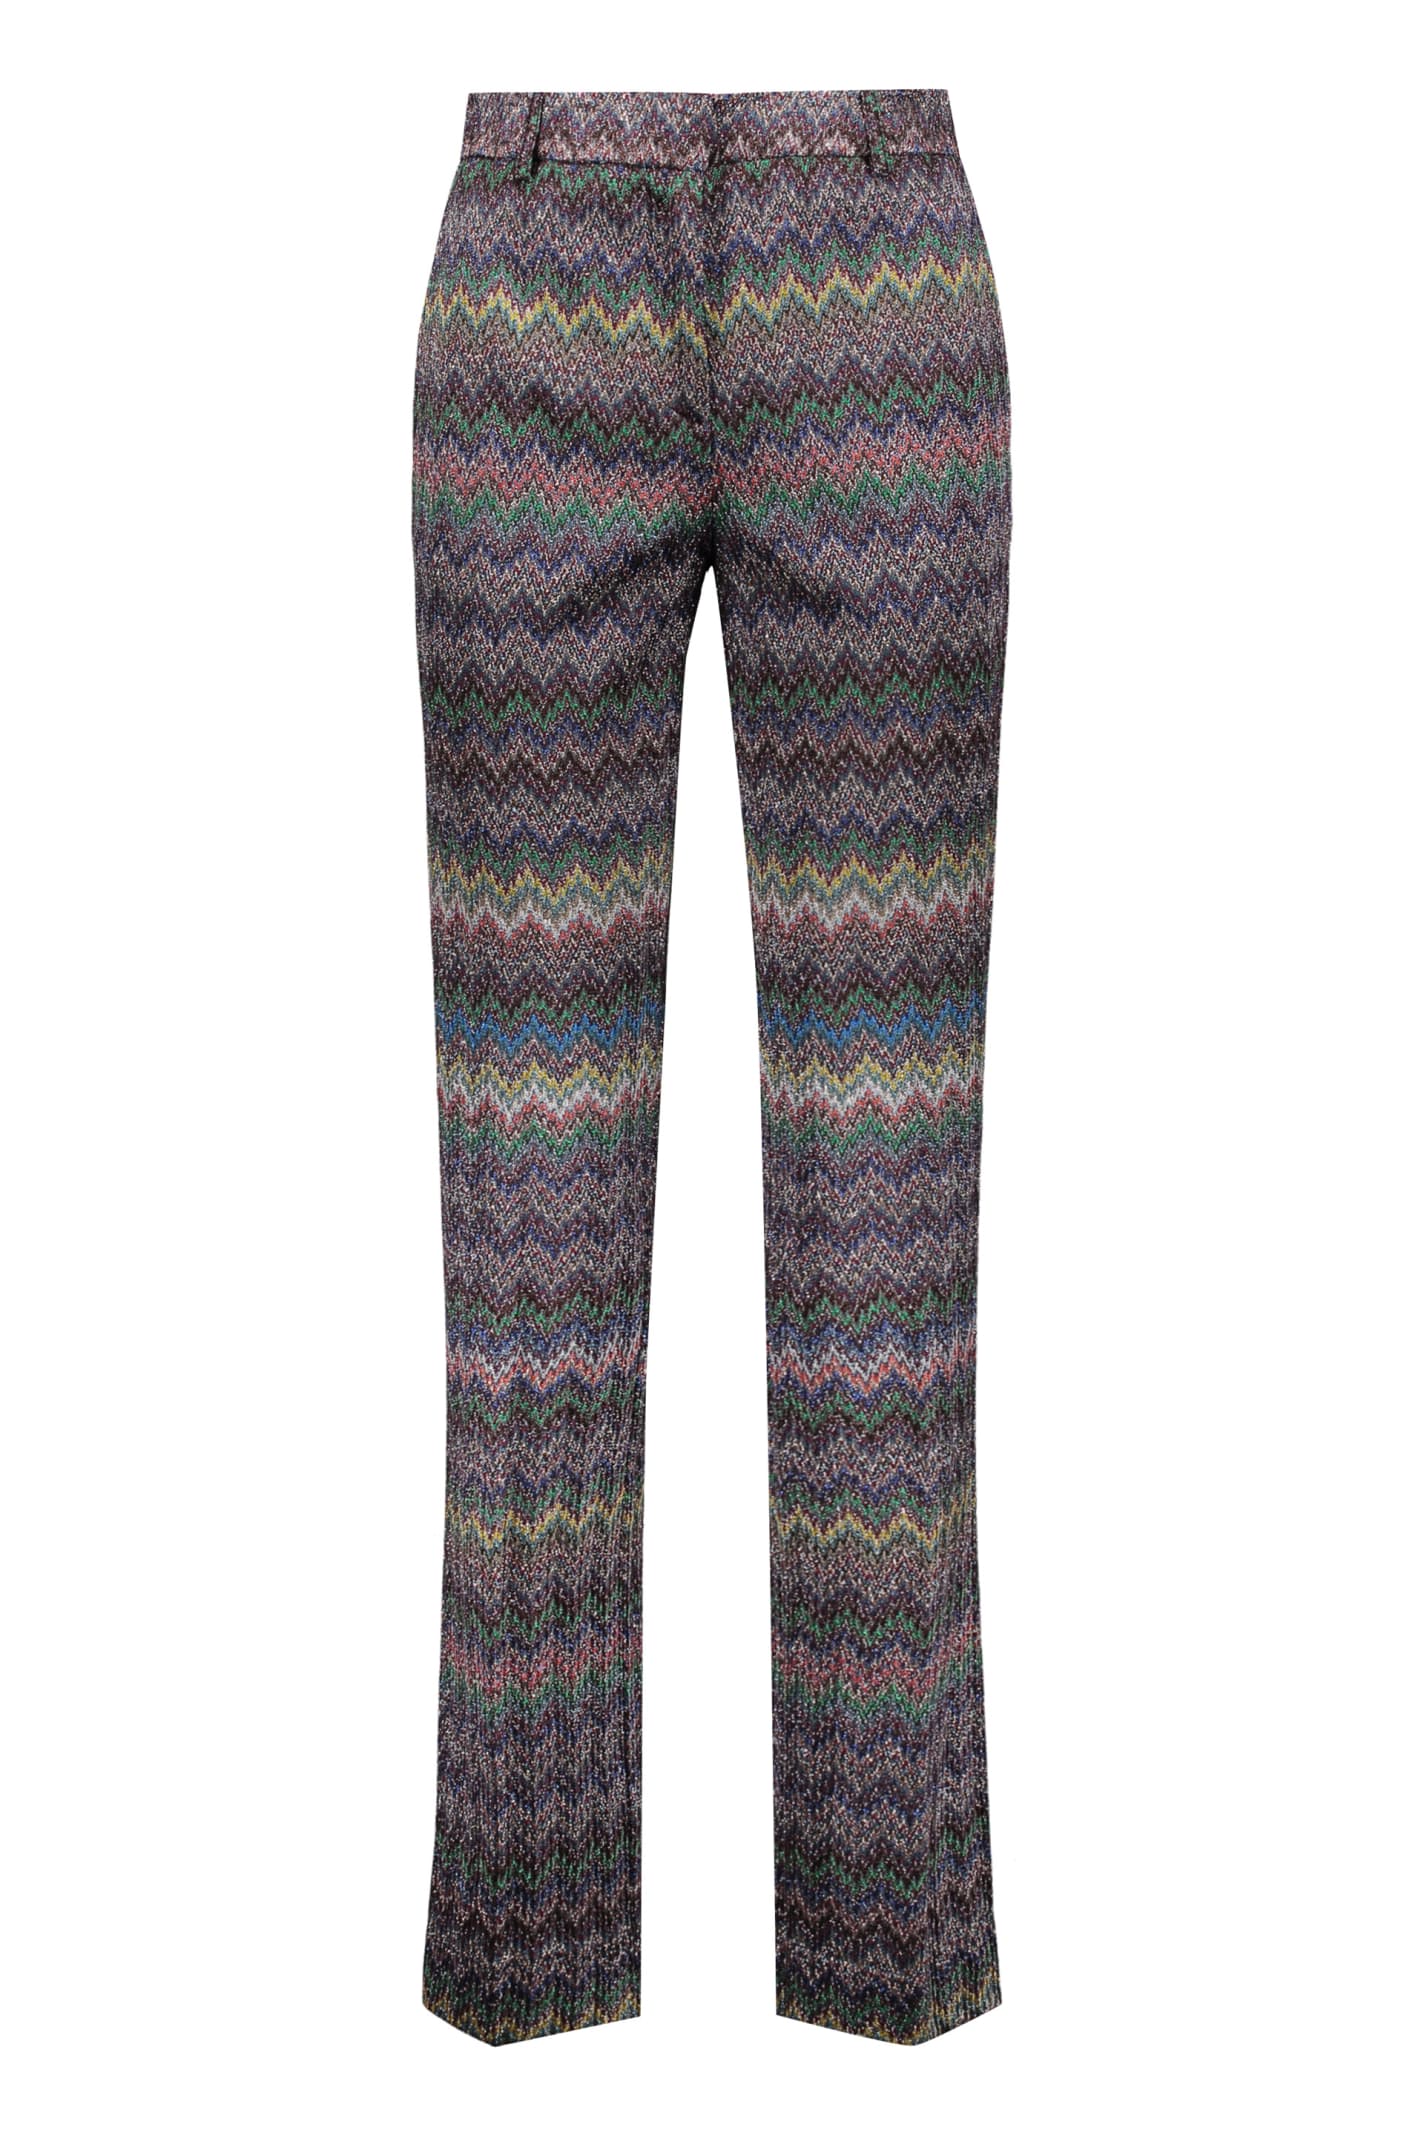 Missoni Lurex Chevron Knitted Palazzo Trousers In Multicolor